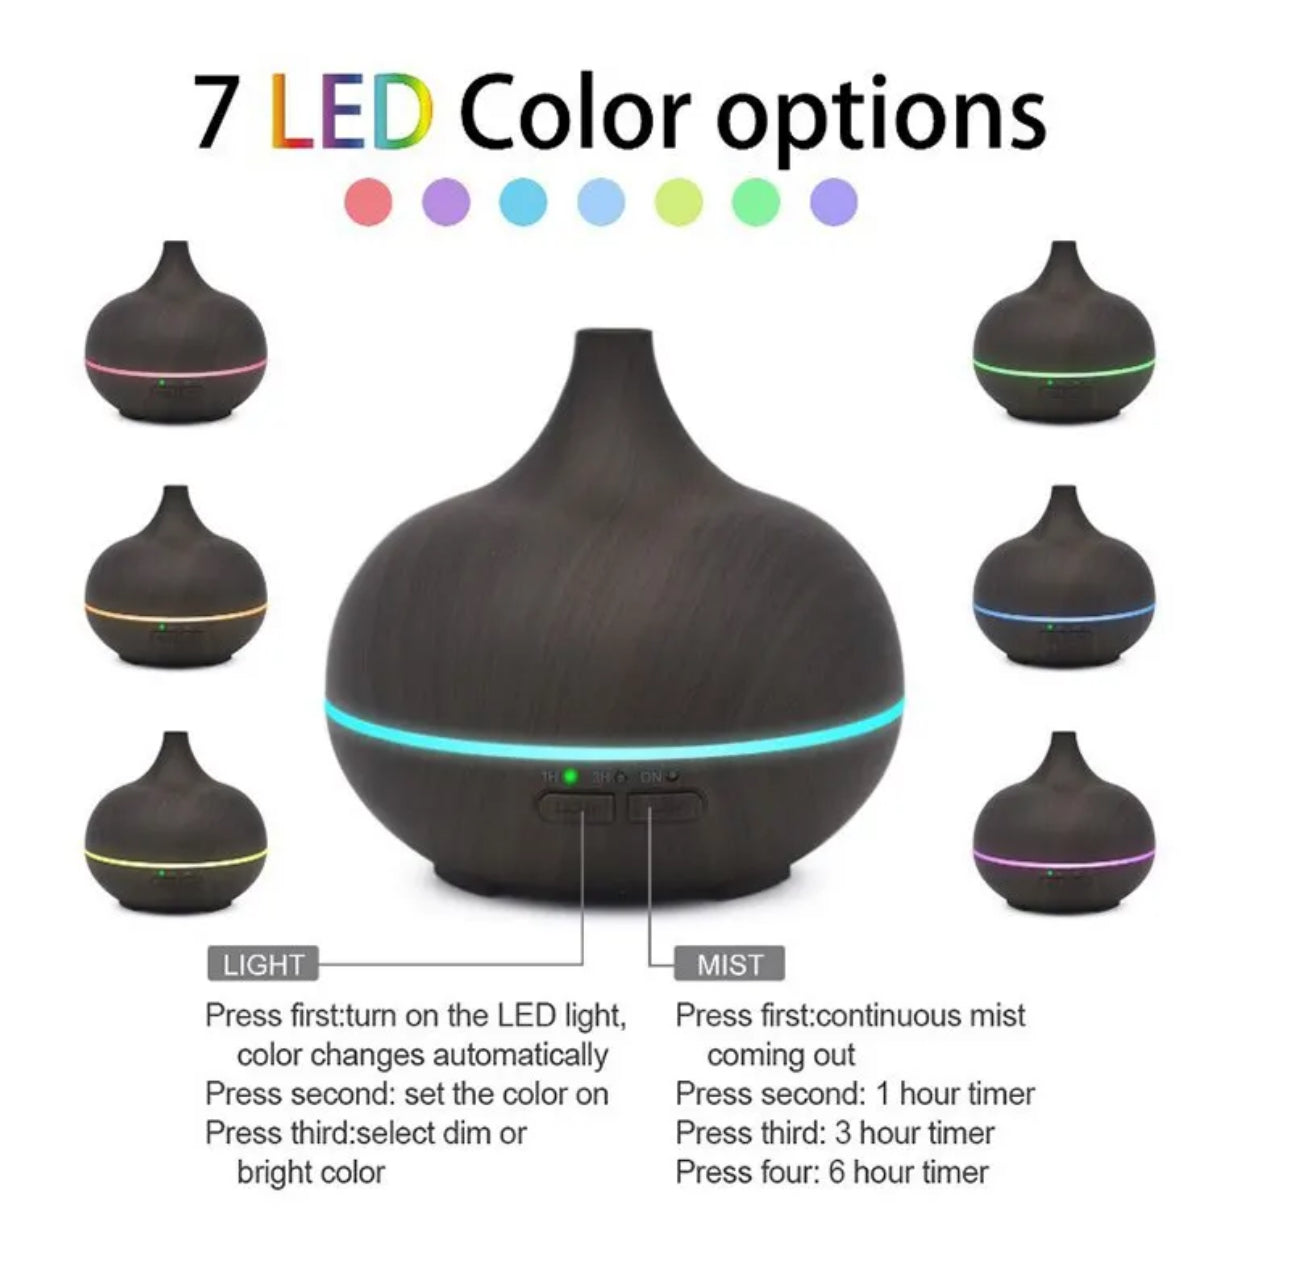 SET OFFER - Electric aroma diffuser 500 ml with LED and oils 30 ml (3 pieces)